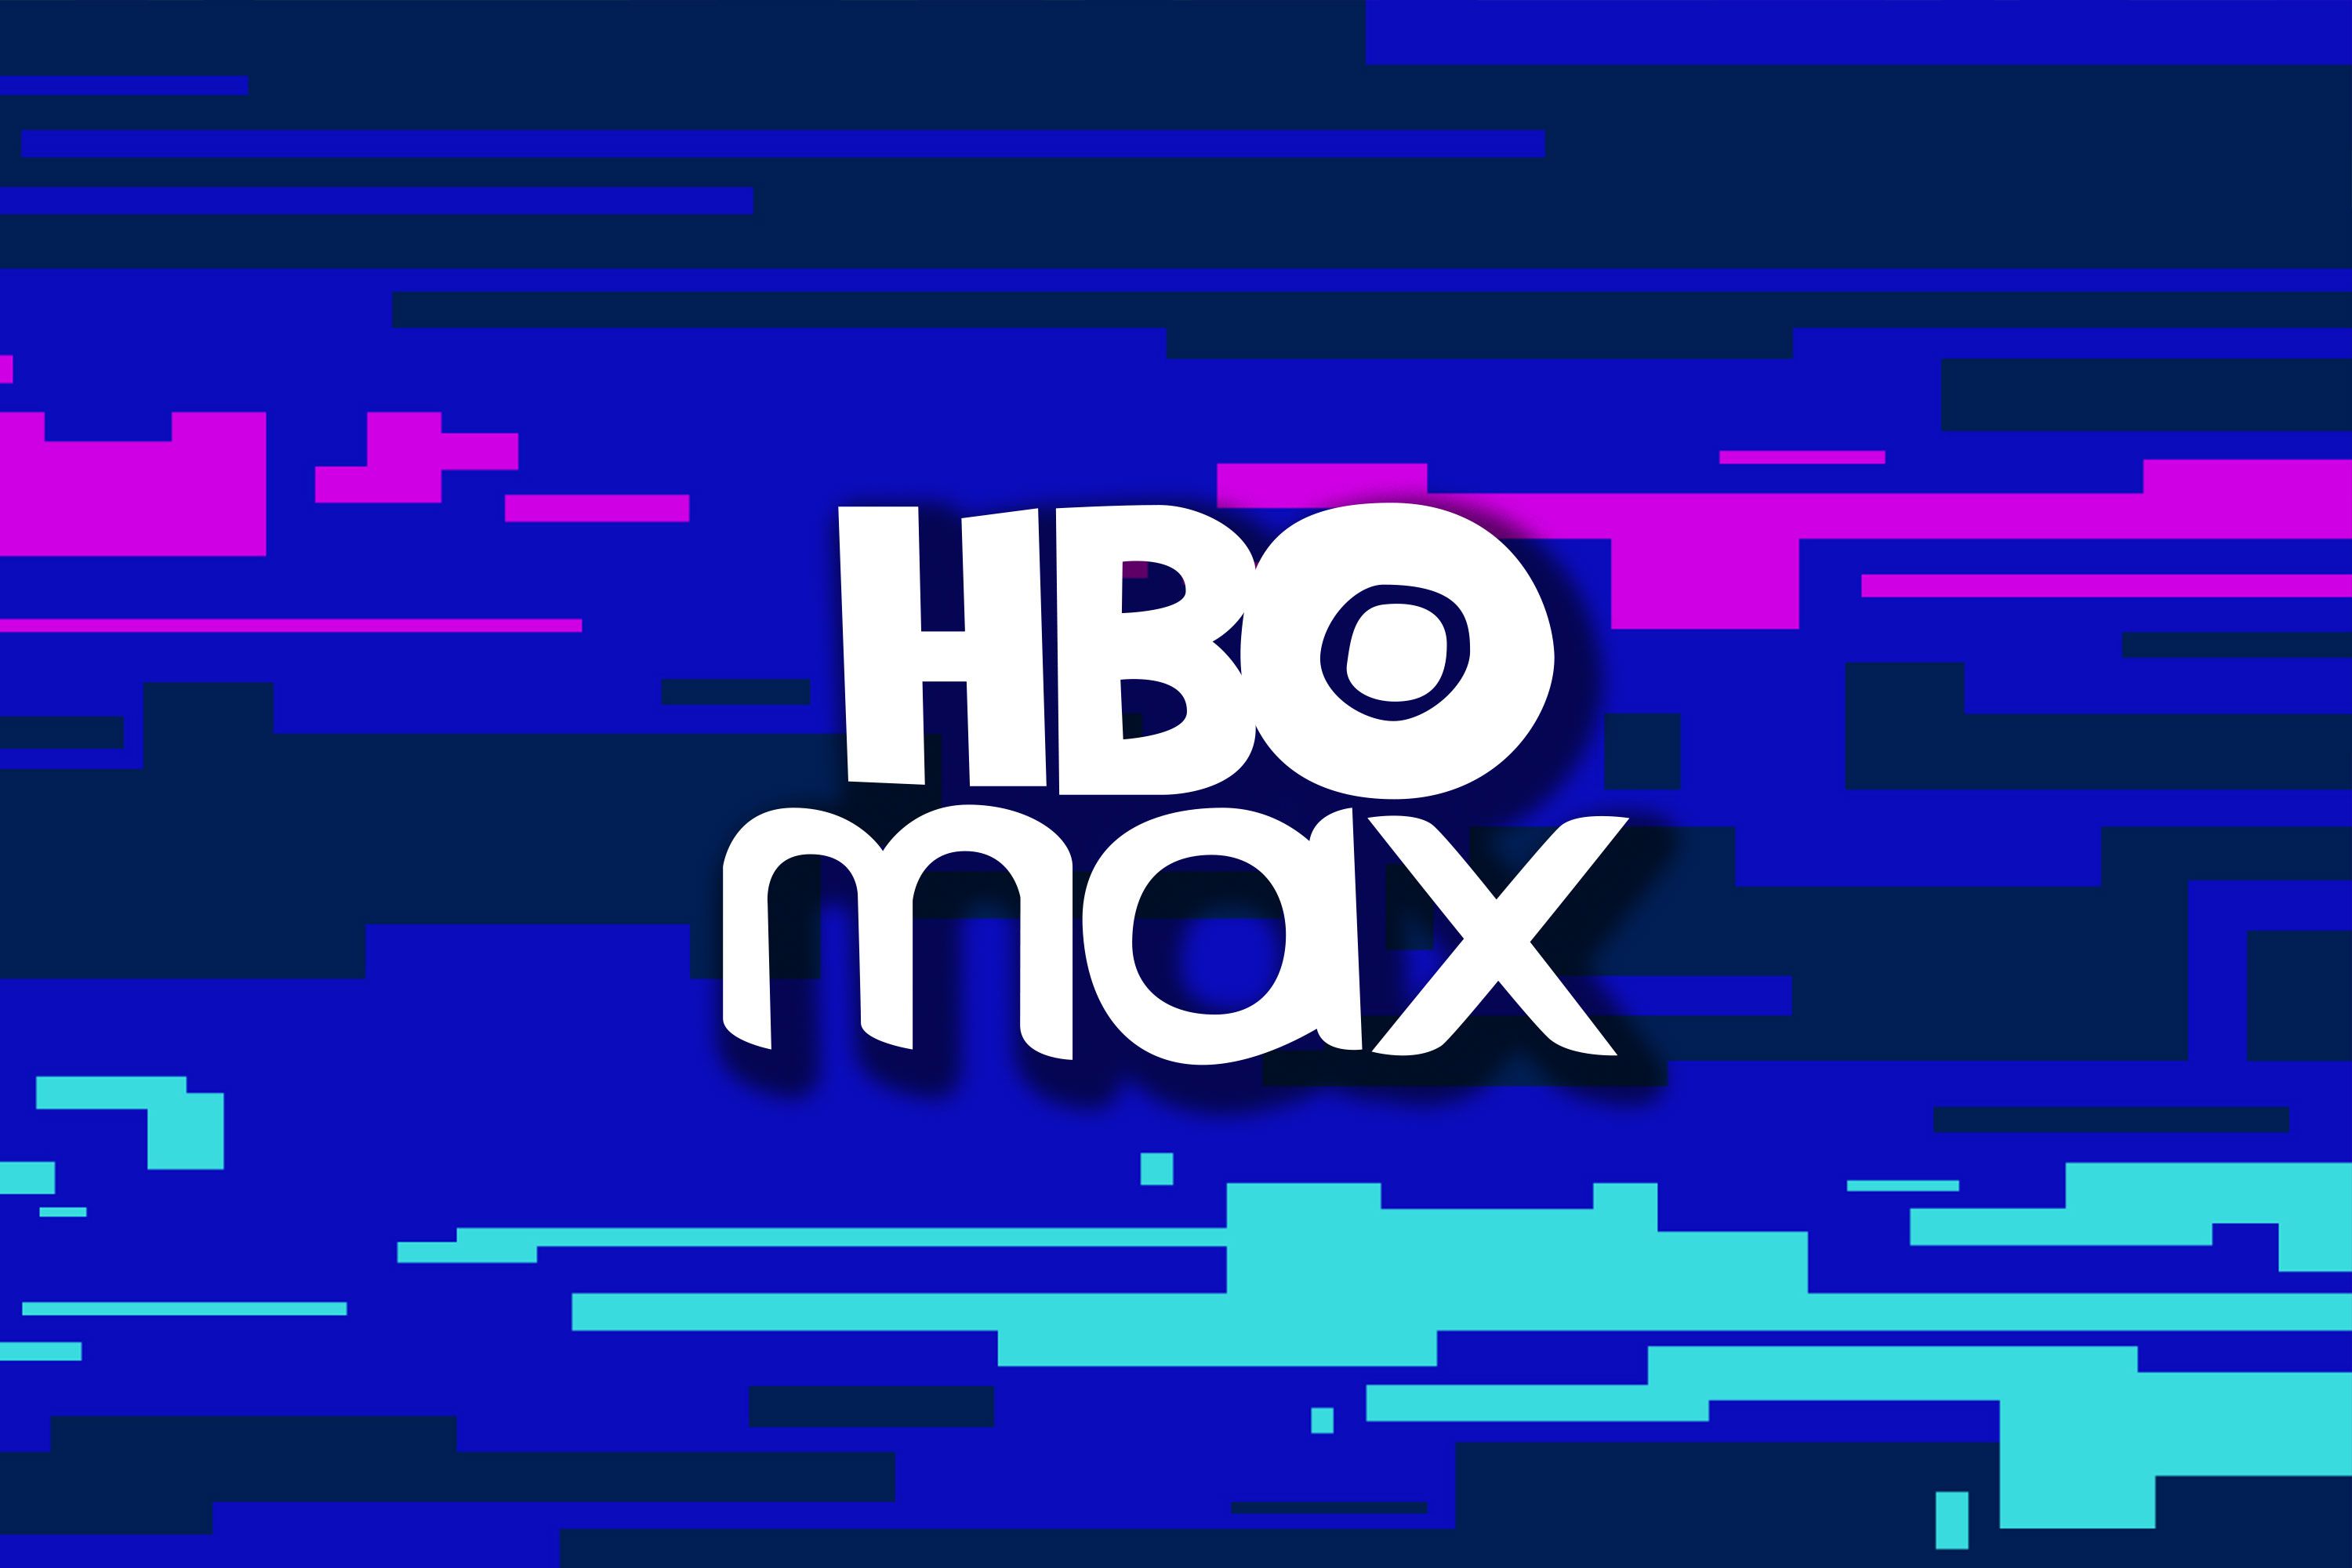 HBO Max – VLZ STORE